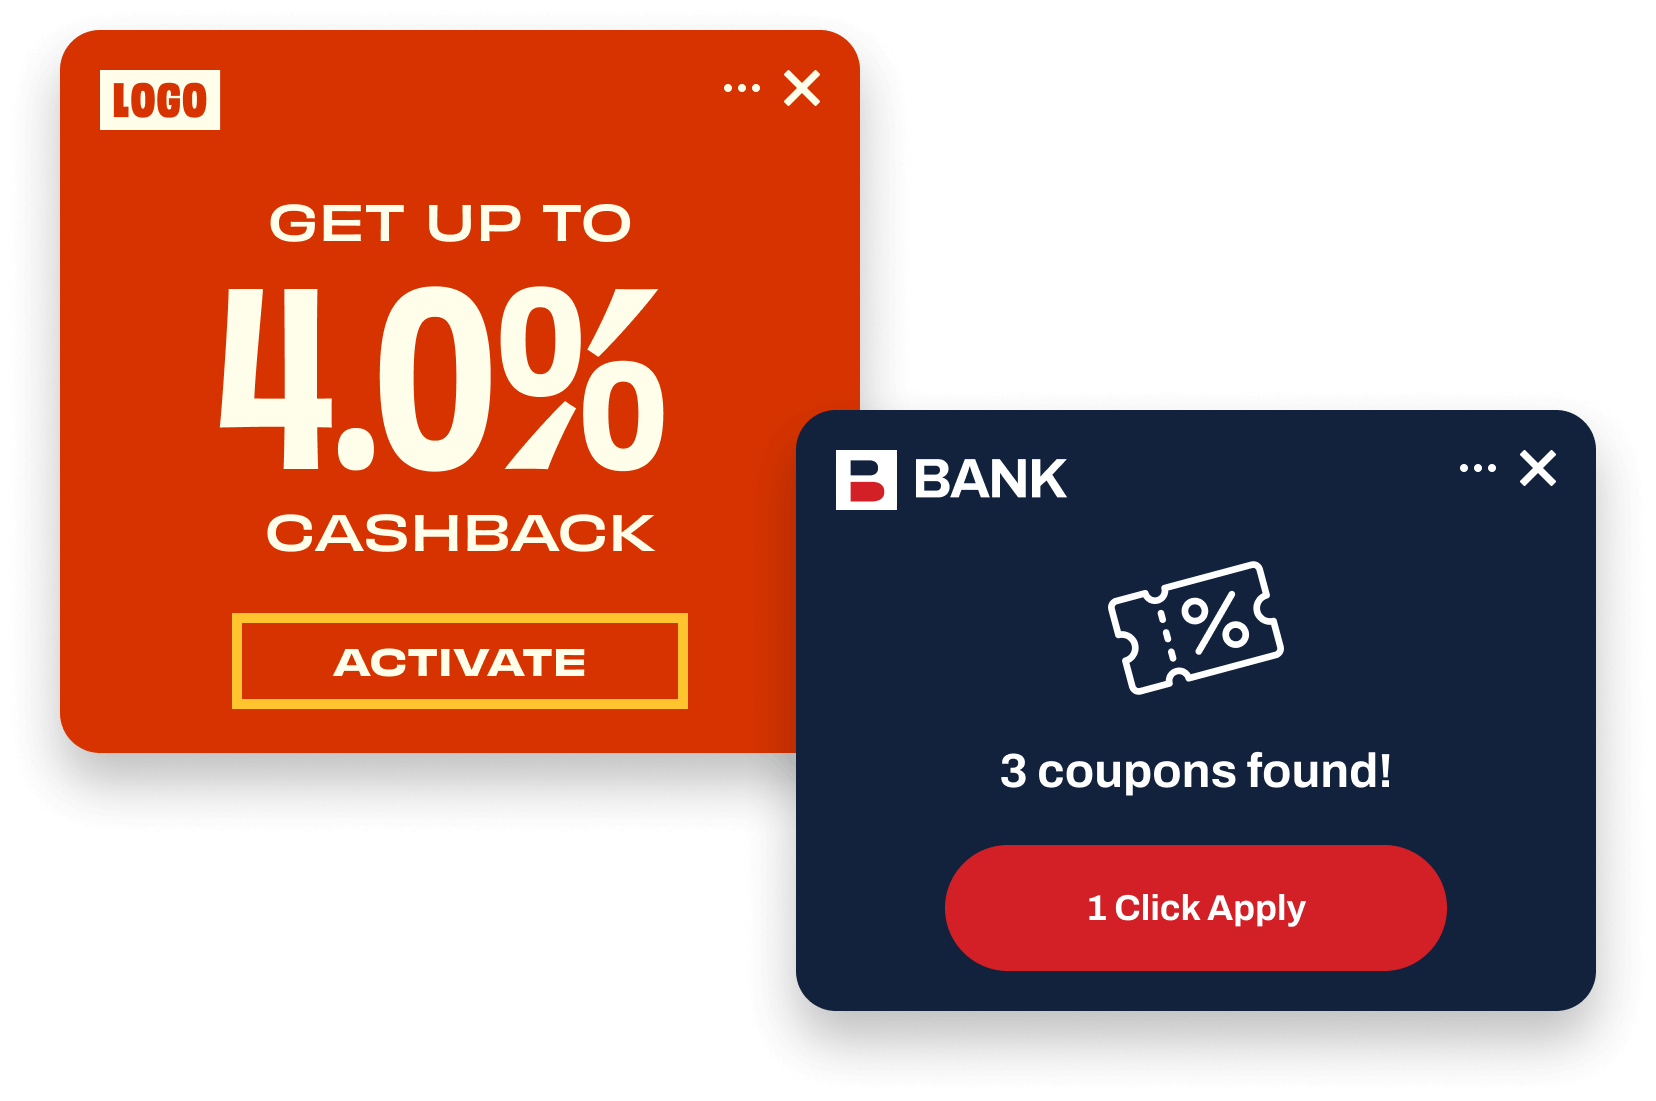 Extension Alerts Collaged — Alert on left is red orange with generic logo rectangle in top right, Get up to 4.0% Cashback, and Activate button. Alert on the right is dark blue has a generic bank logo, coupon icon, 3 coupons found! and button that says 1 Click Apply.